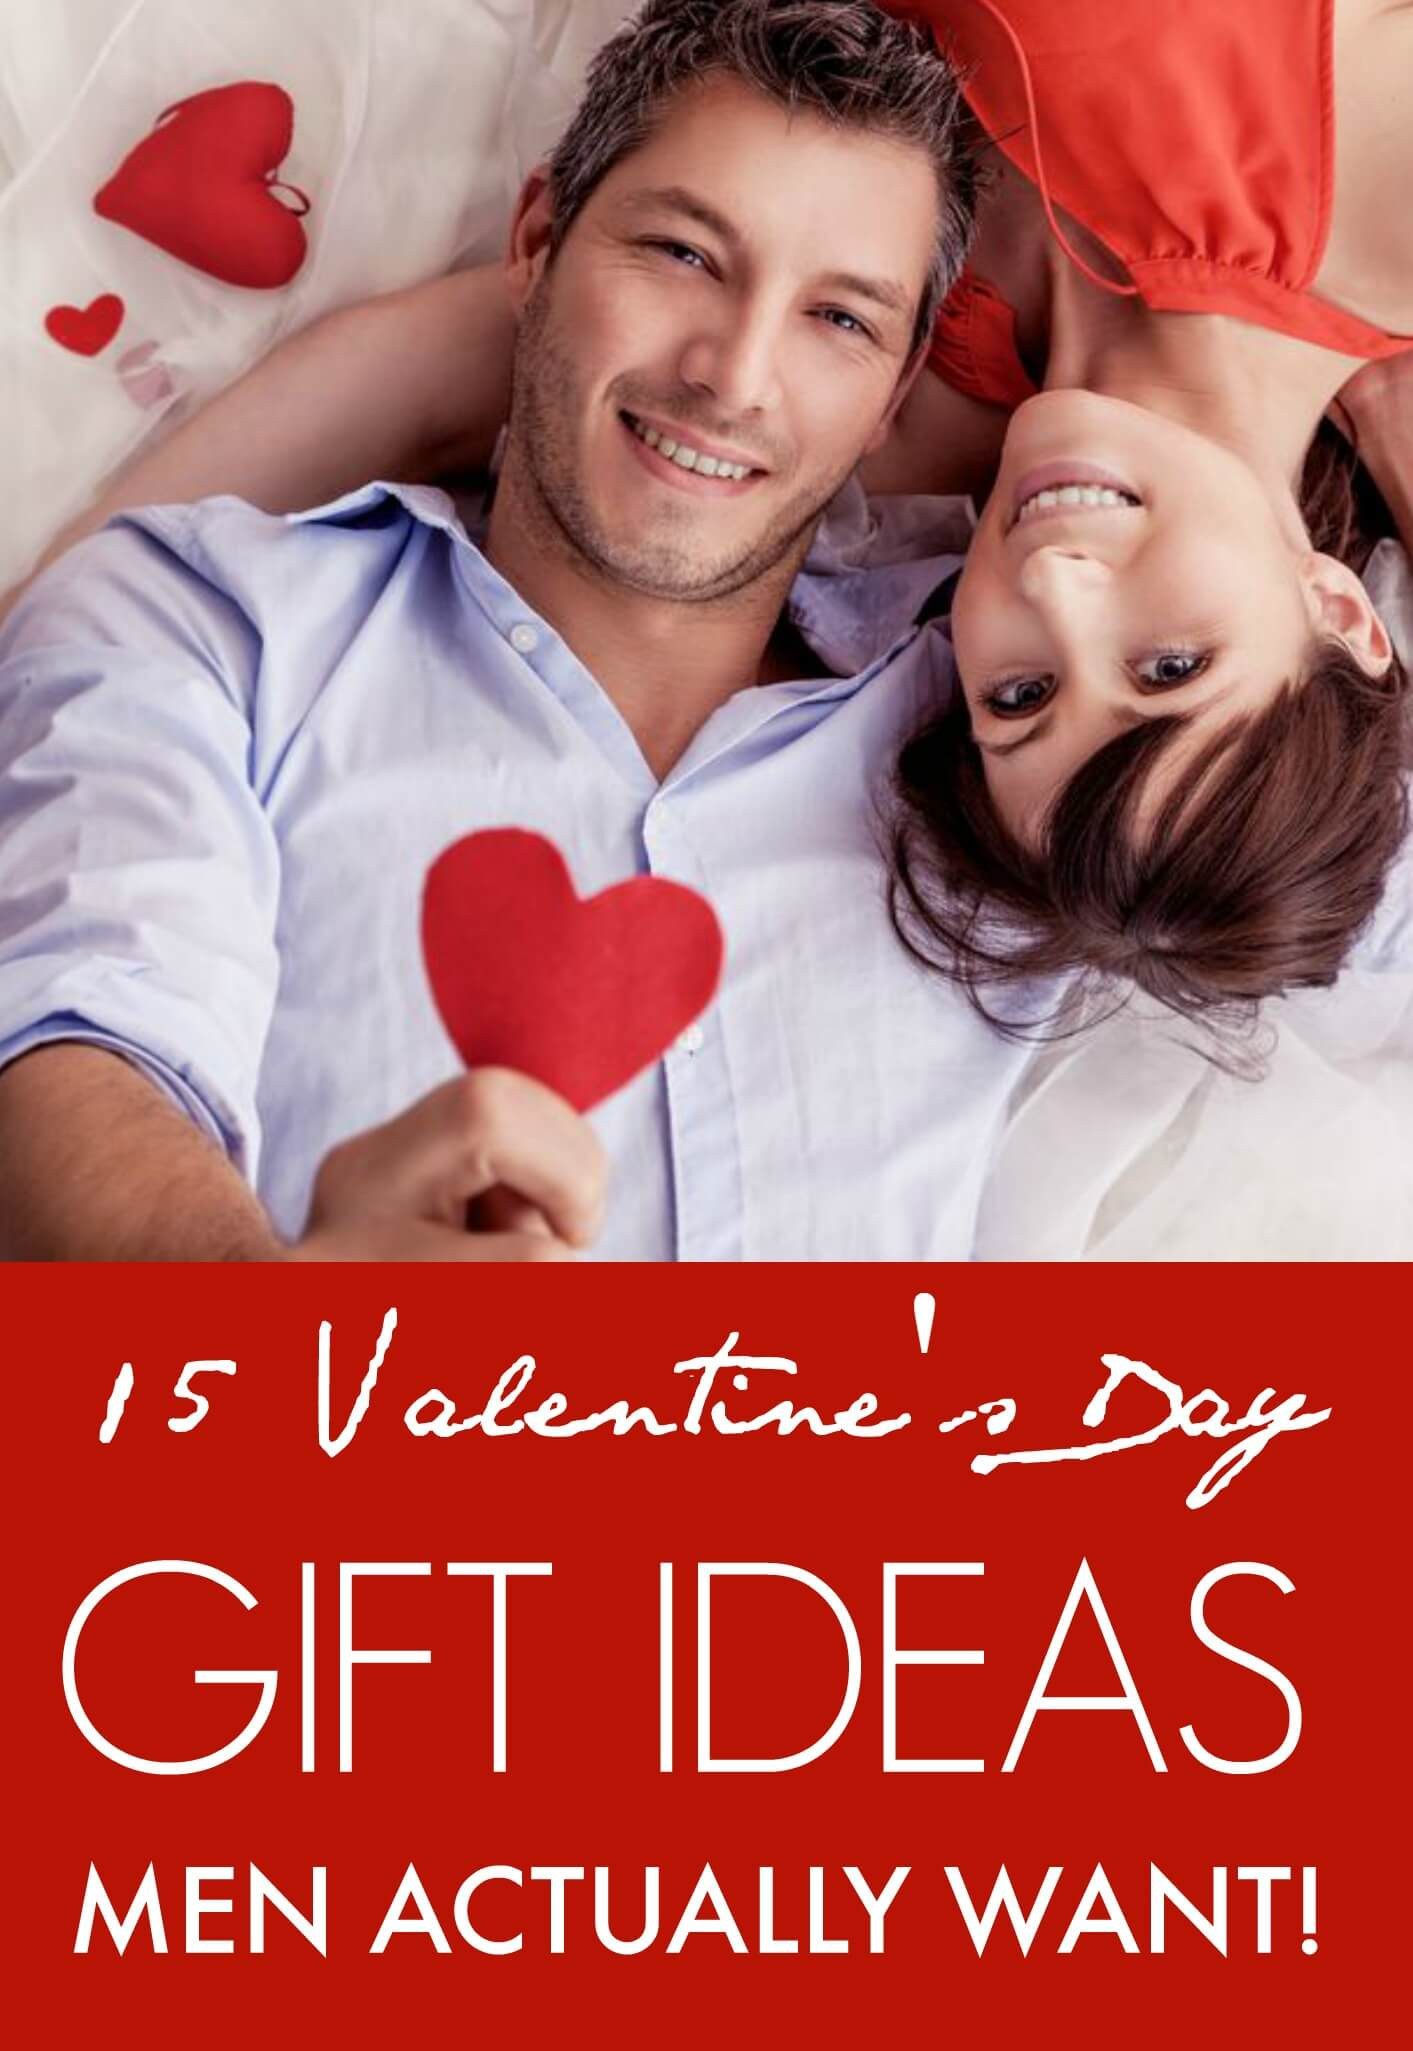 Valentines Day Ideas For Guys
 15 Valentine’s Day Gift ideas Men Actually Want